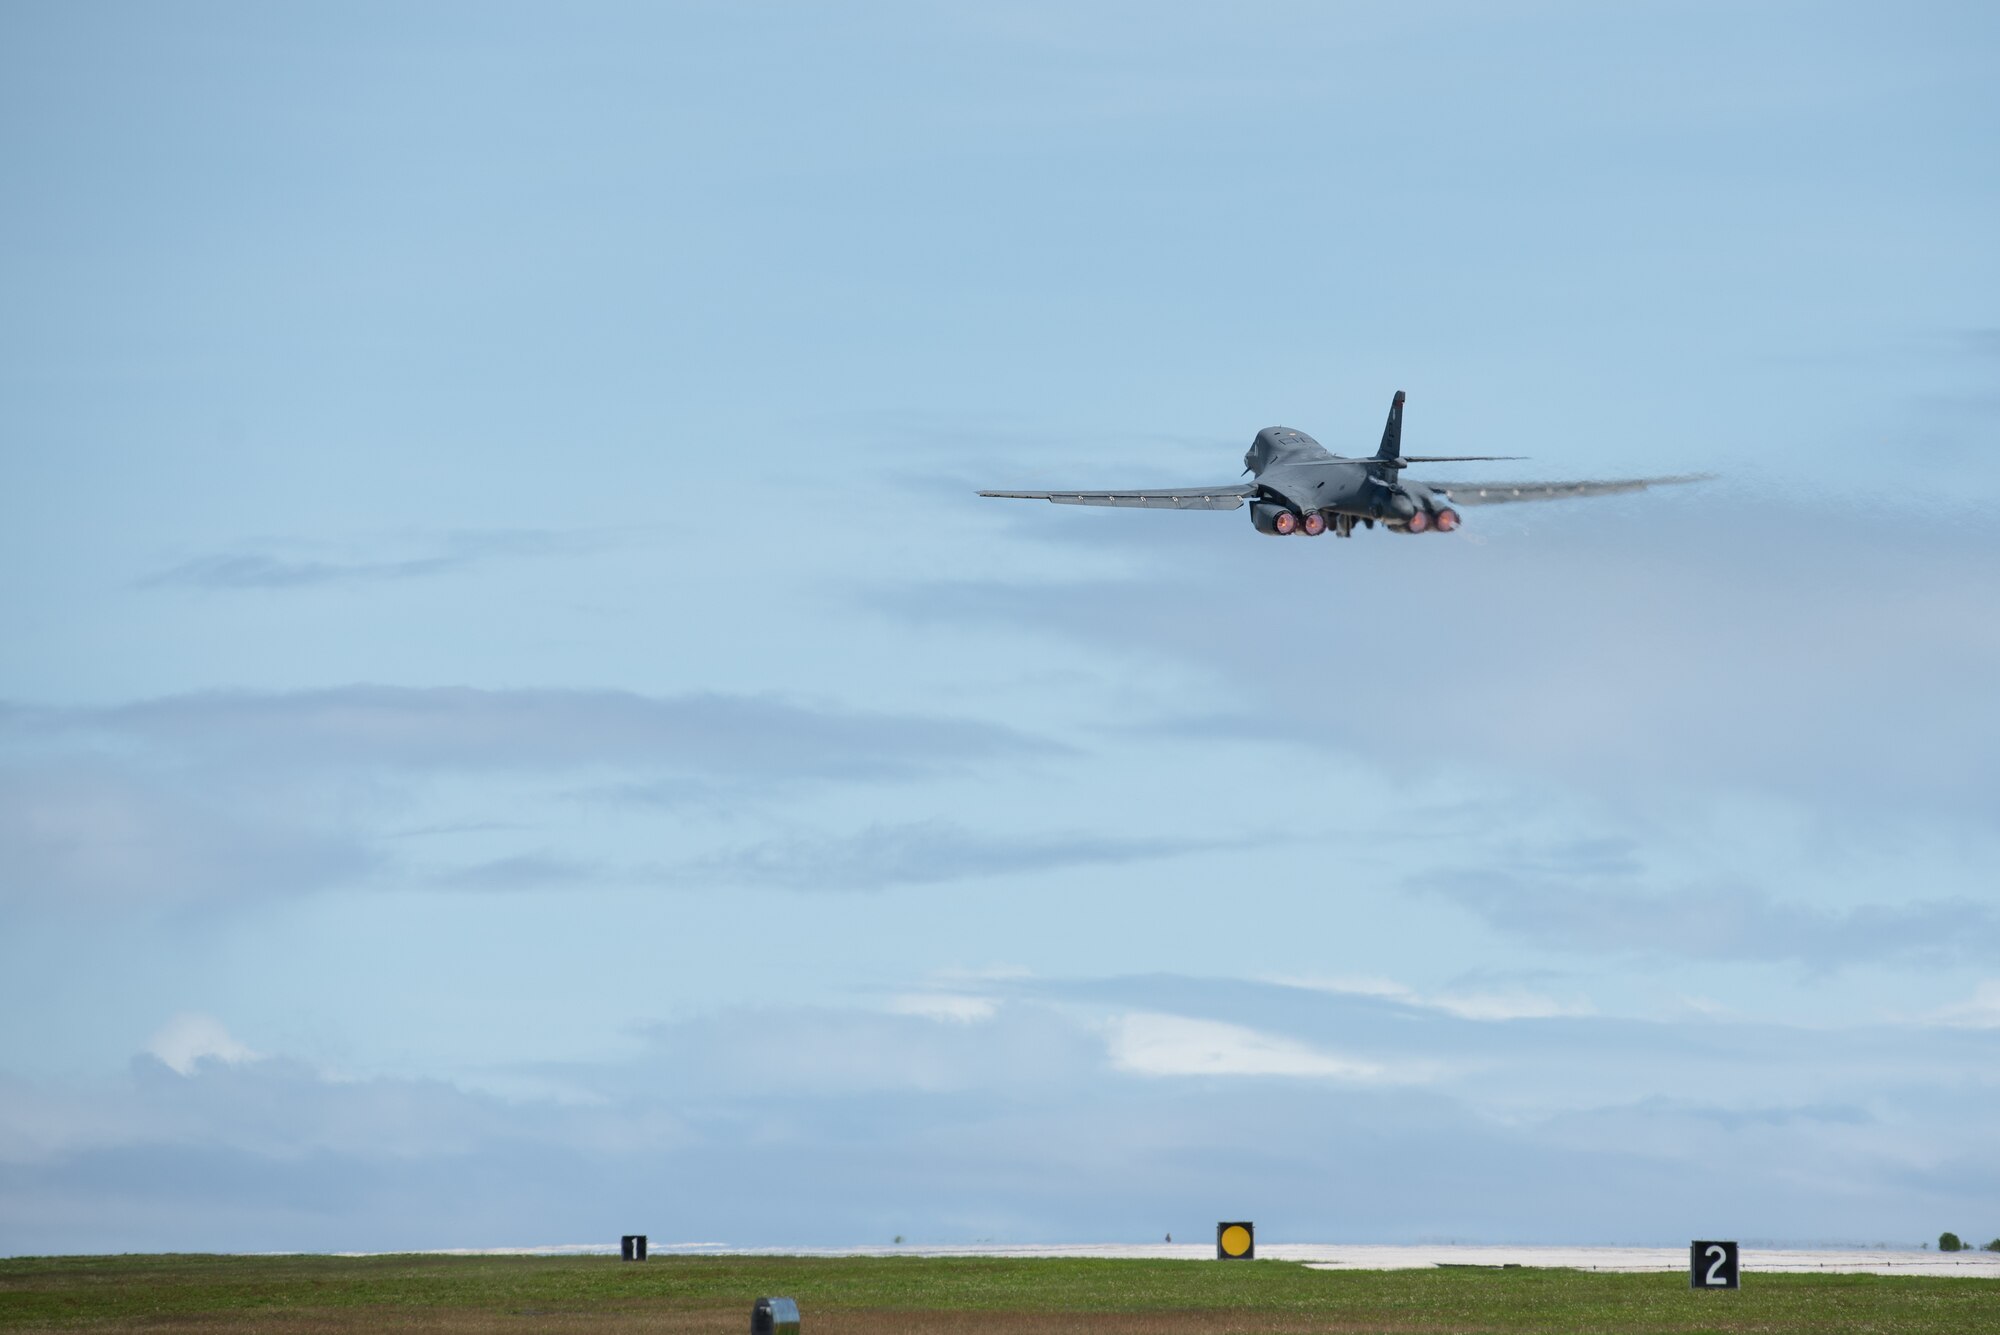 A U.S. Air Force B-1B Lancer assigned to the 37th Expeditionary Bomb Squadron, Ellsworth Air Force Base, South Dakota, takes off in support of a Bomber Task Force mission at Andersen AFB, Guam, Nov. 5, 2022. The U.S. Indo-Pacific Command routinely and visibly demonstrates its commitment to allies and partners through the employment of military forces, demonstrating strategic predictability, while becoming more operationally unpredictable to adversaries. (U.S. Air Force photo by Senior Airman Yosselin Campos)